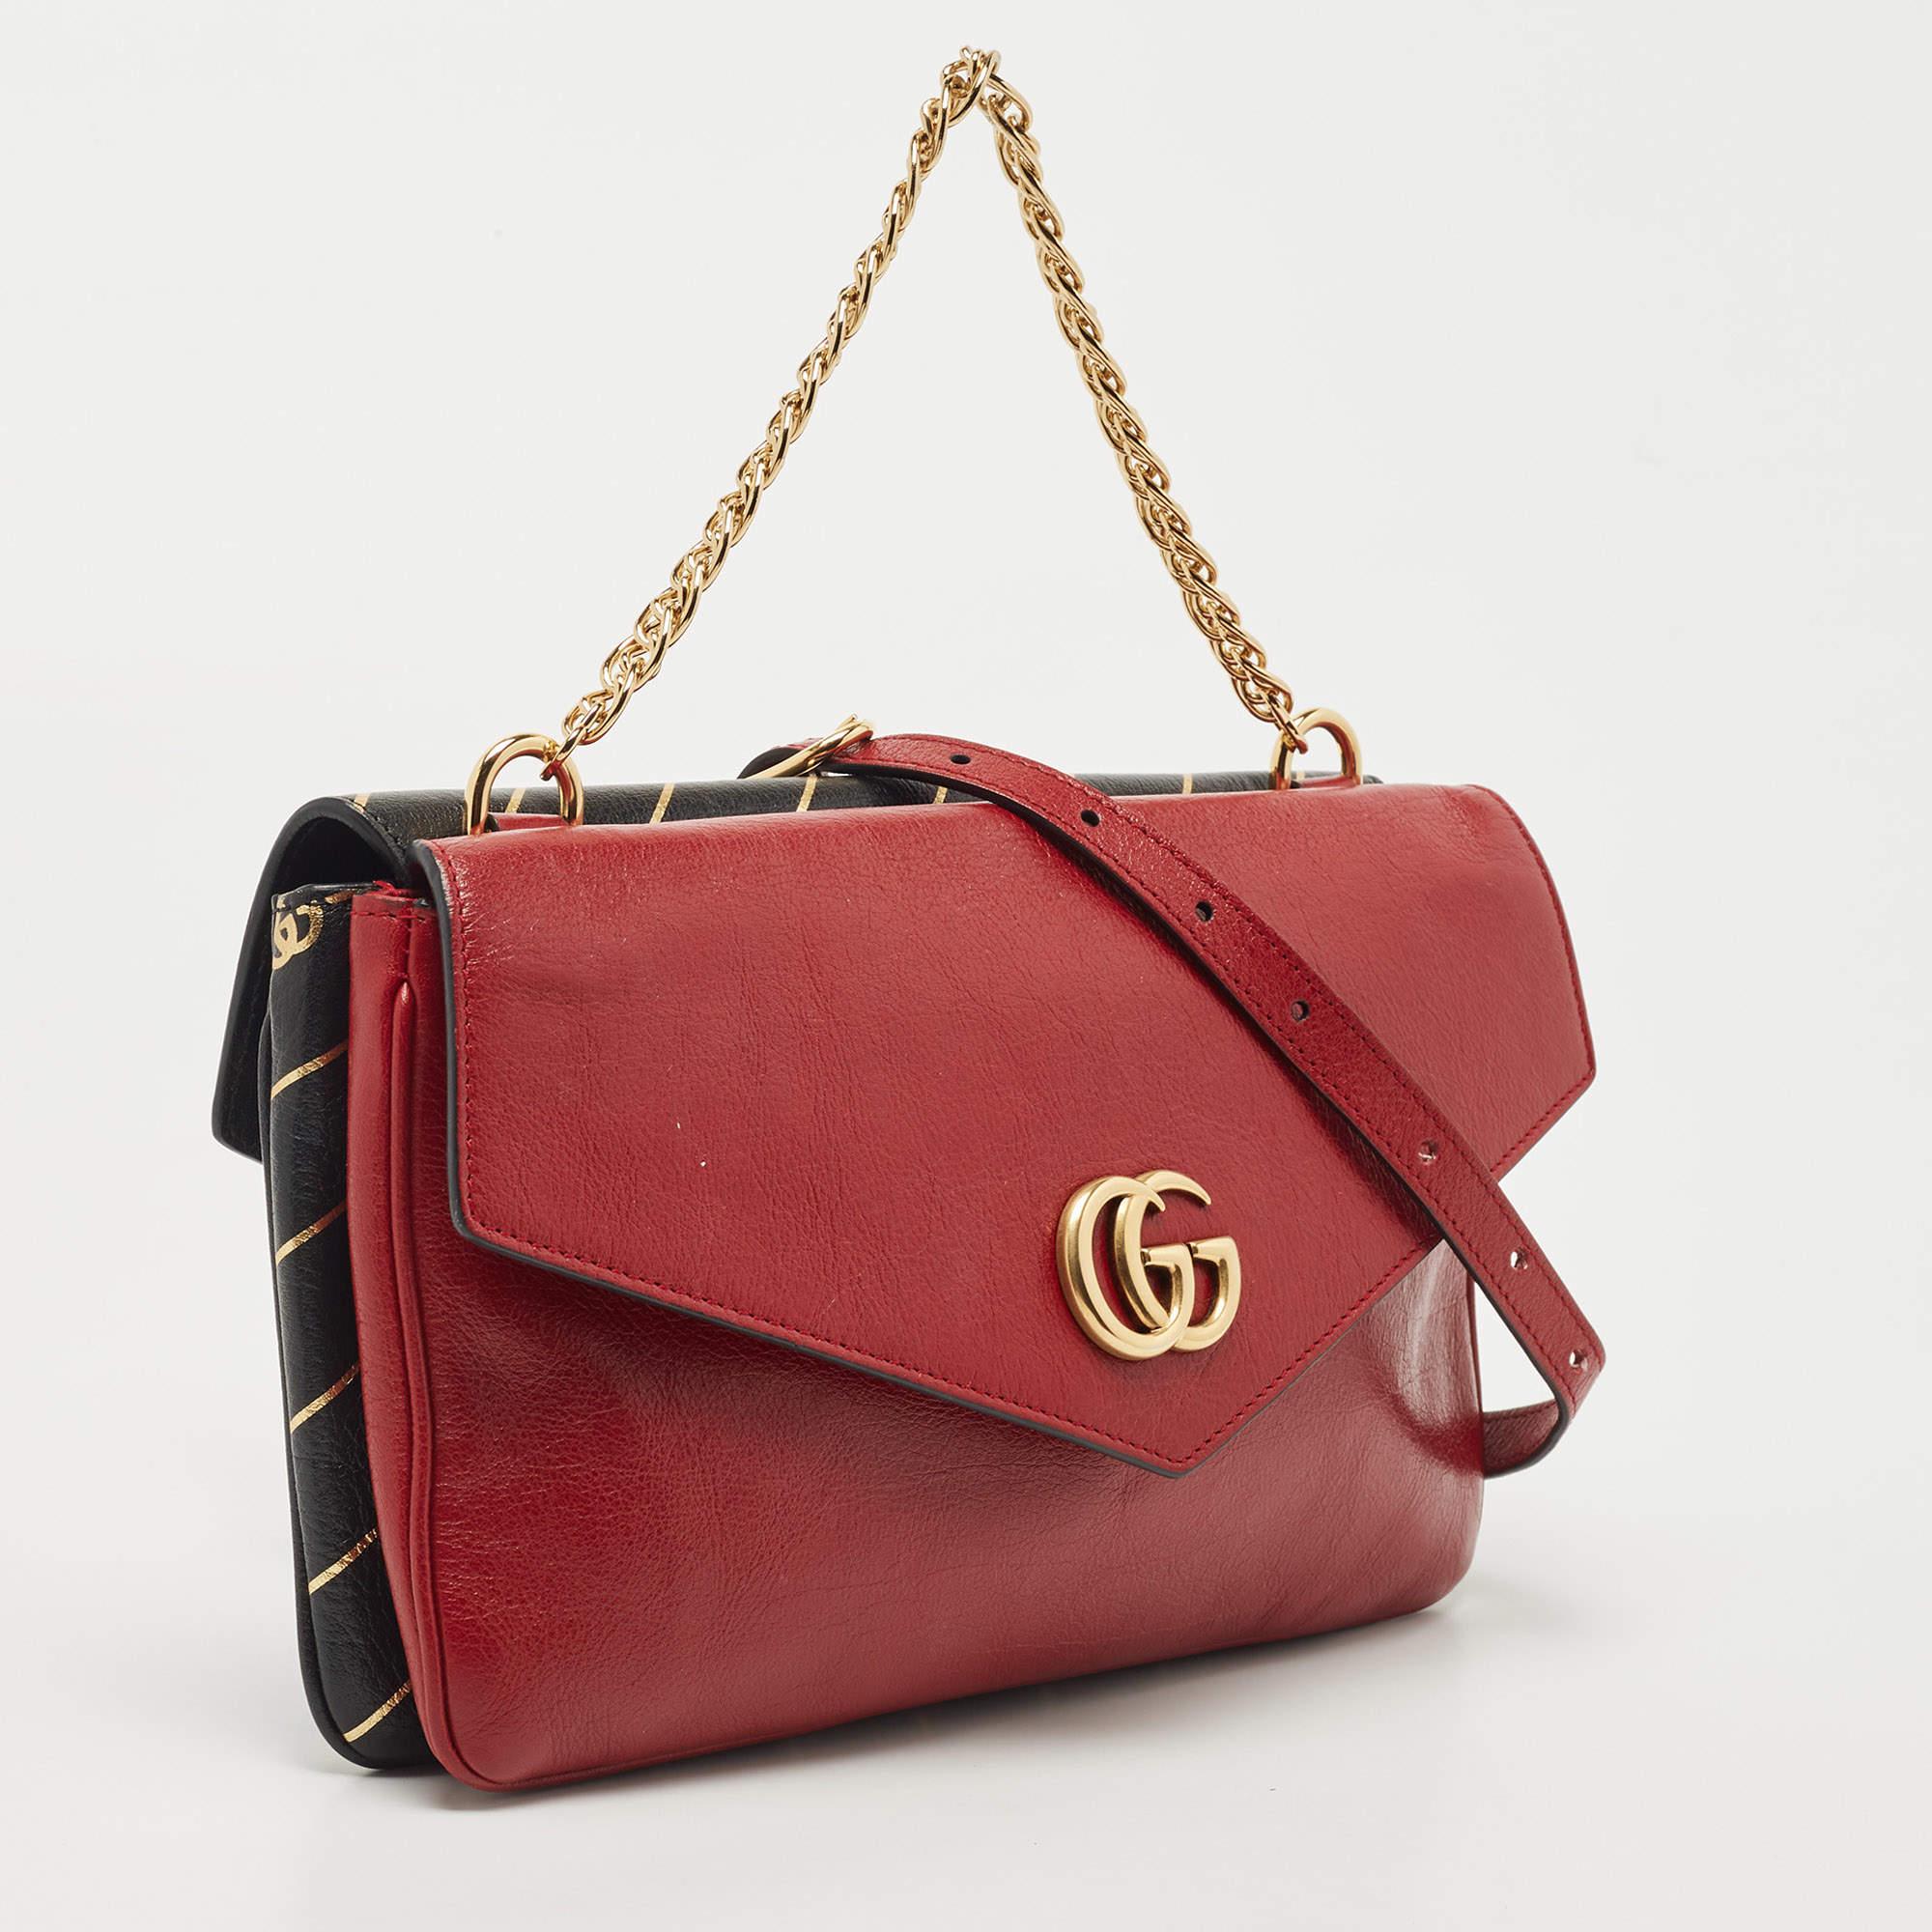 Women's Gucci Black and Red Leather Thiara Bag